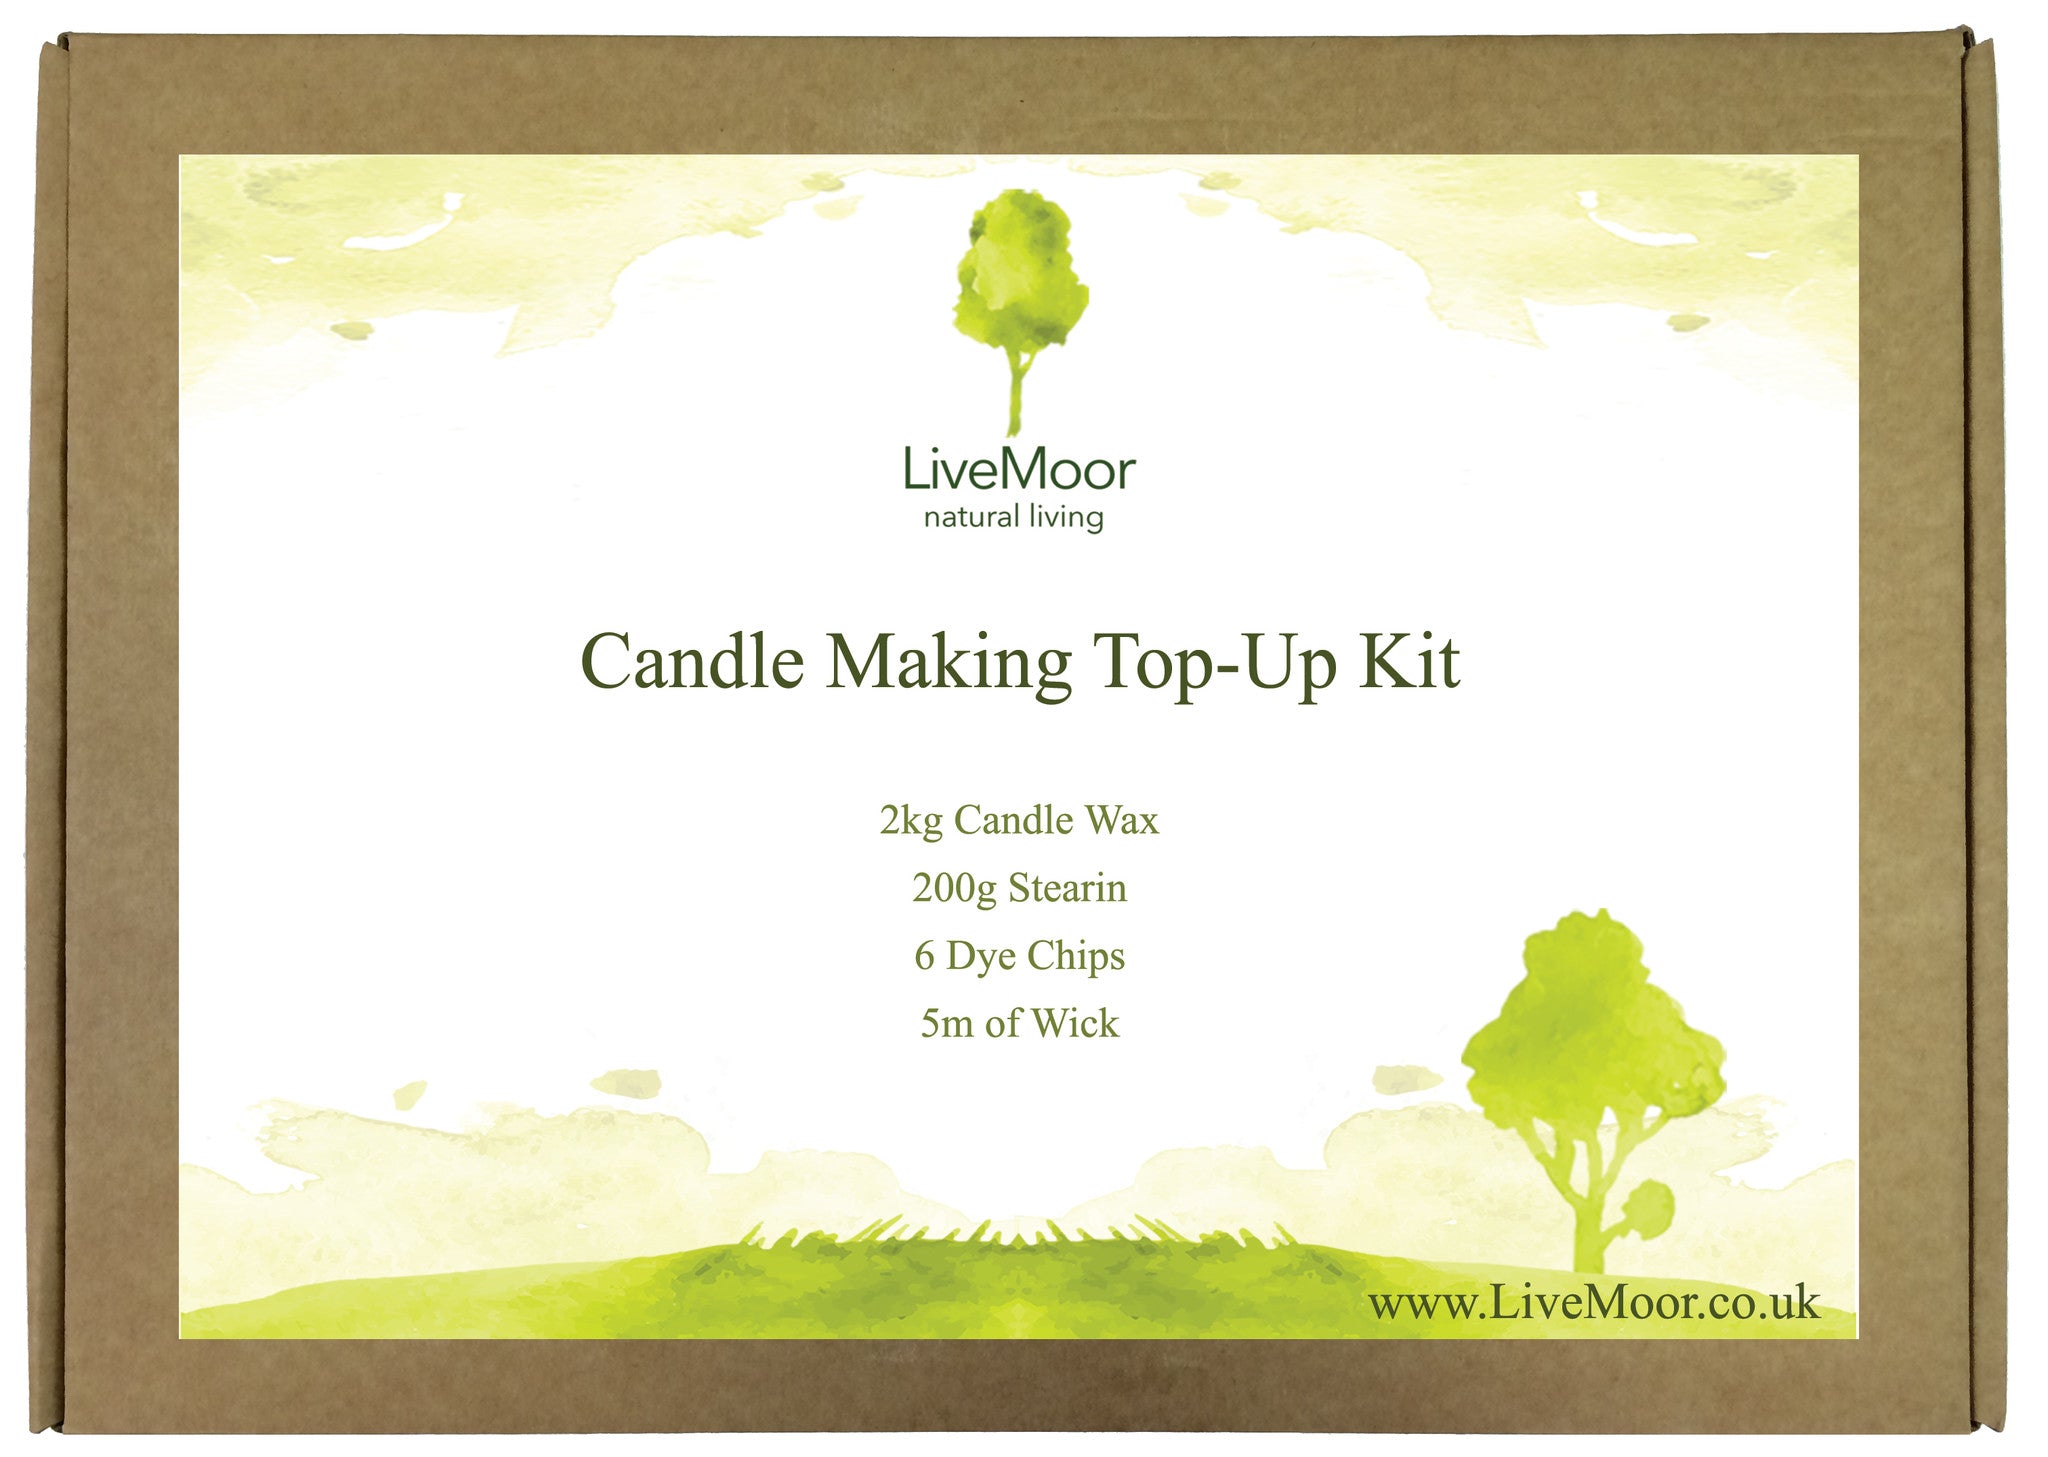 The LiveMoor Candle Making Top Up Kit